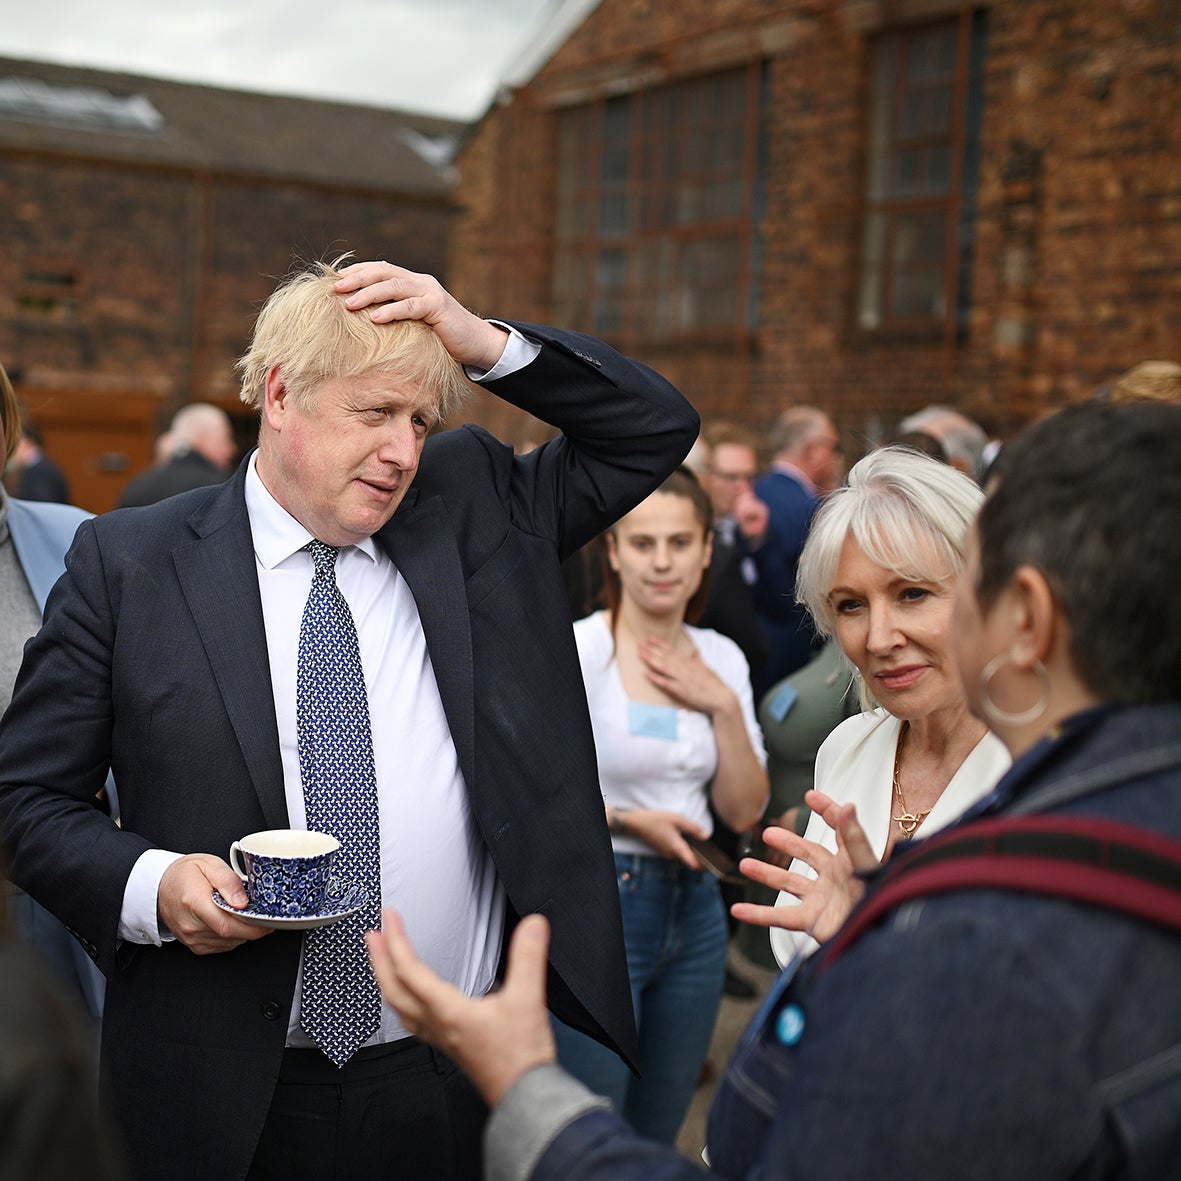 Why is Boris Johnson waging a culture war? With Rory Stewart and Kim Leadbeater